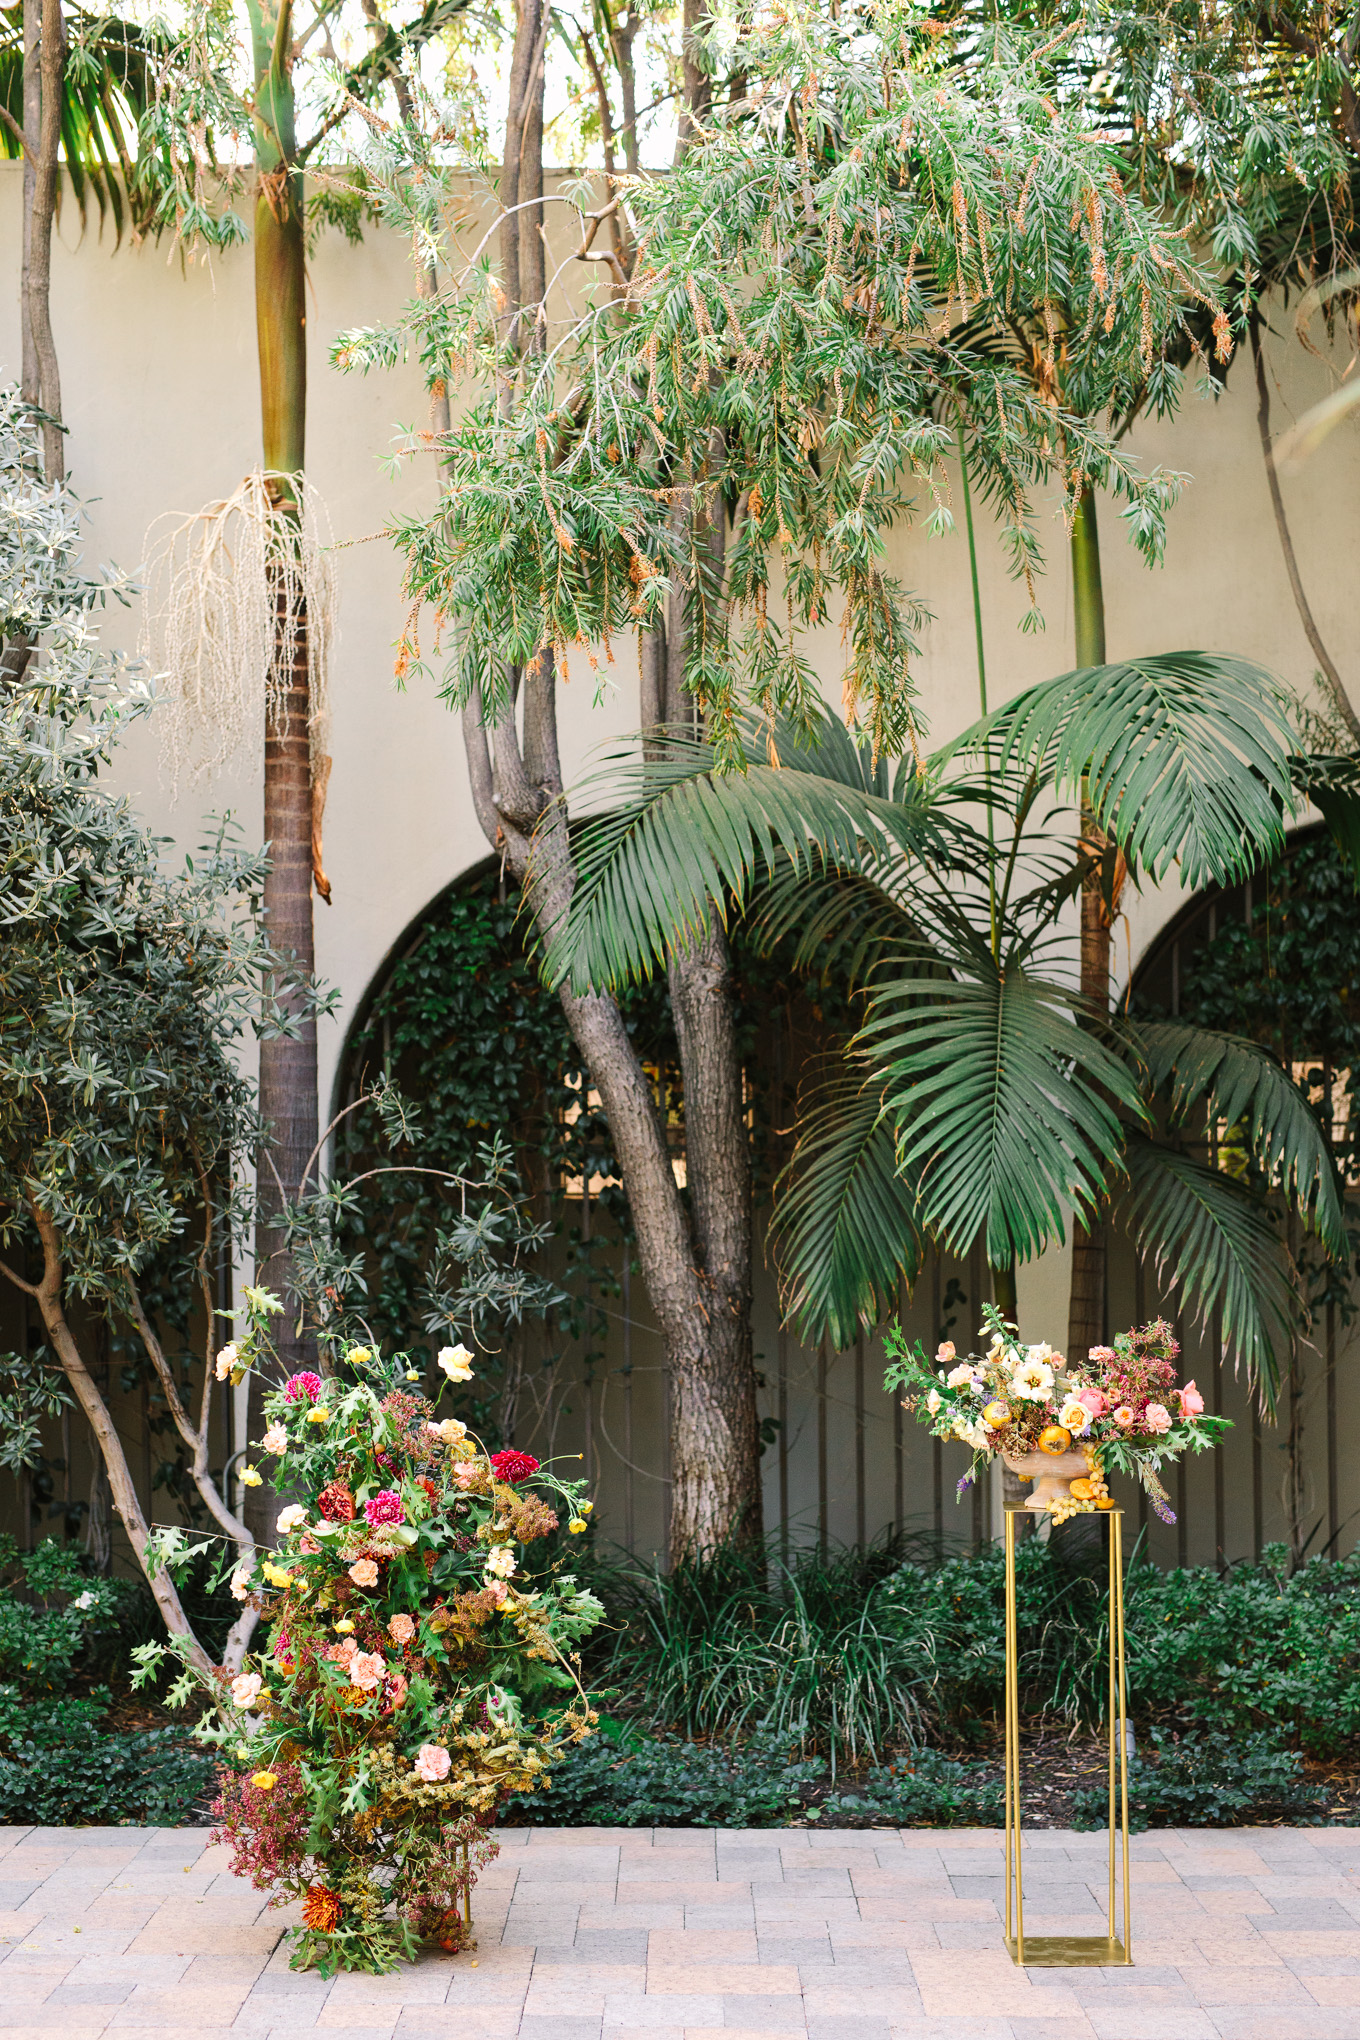 Vibiana courtyard wedding ceremony | Best Southern California Garden Wedding Venues | Colorful and elevated wedding photography for fun-loving couples | #gardenvenue #weddingvenue #socalweddingvenue #bouquetideas #uniquebouquet   Source: Mary Costa Photography | Los Angeles 